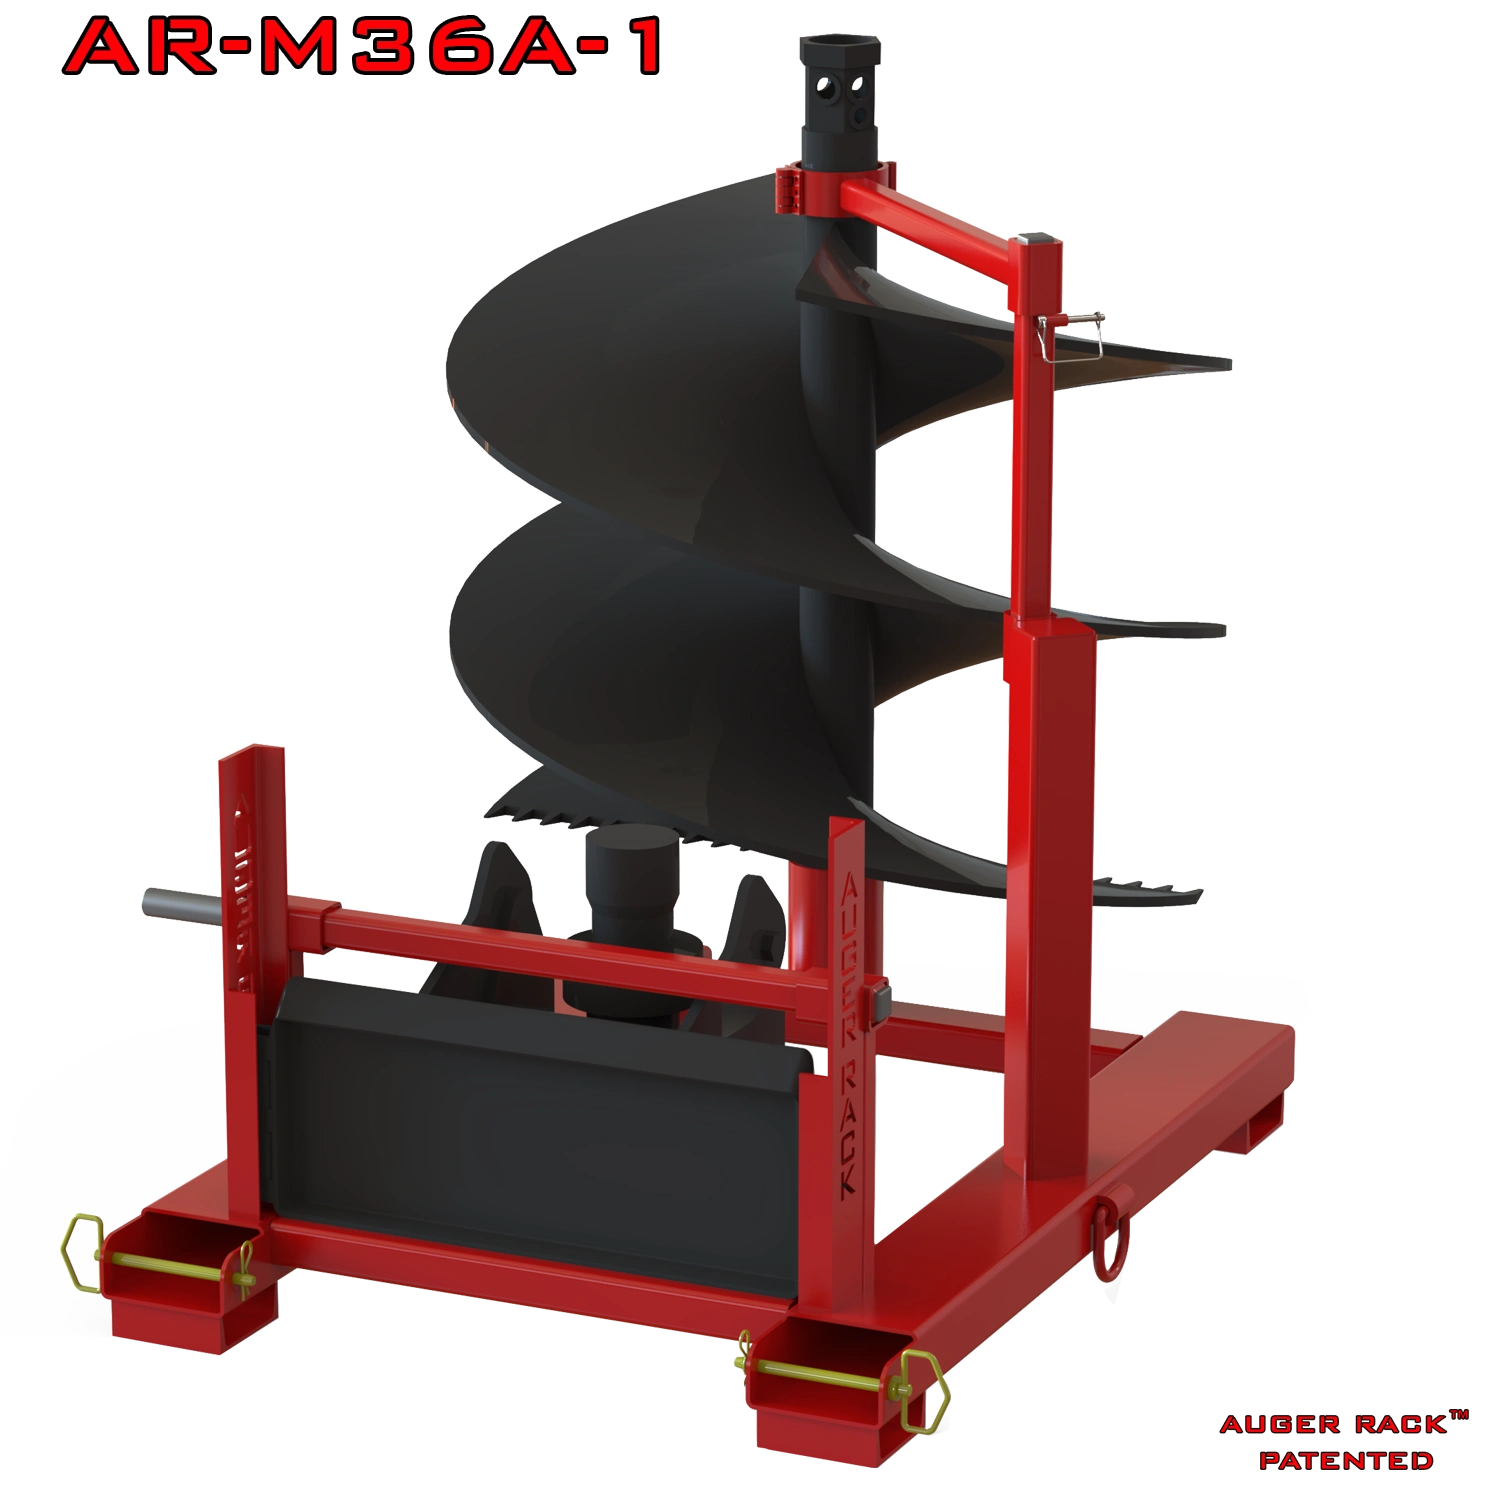 AR-M36A-1 Mini Mobile Auger rack for storage of one 36"or smaller auger